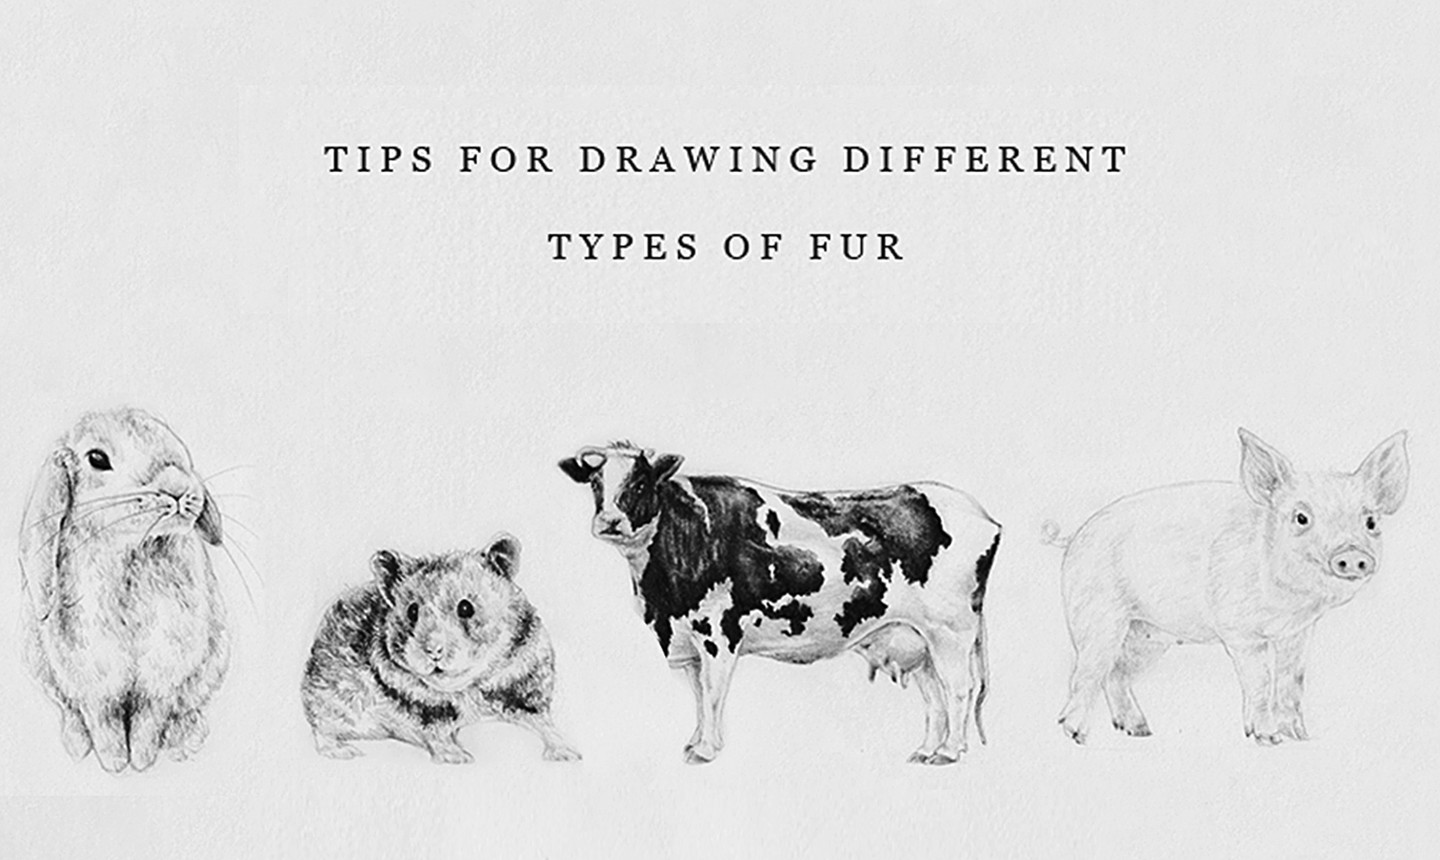 How to Draw Fur: Easy & Quick Tips | Craftsy